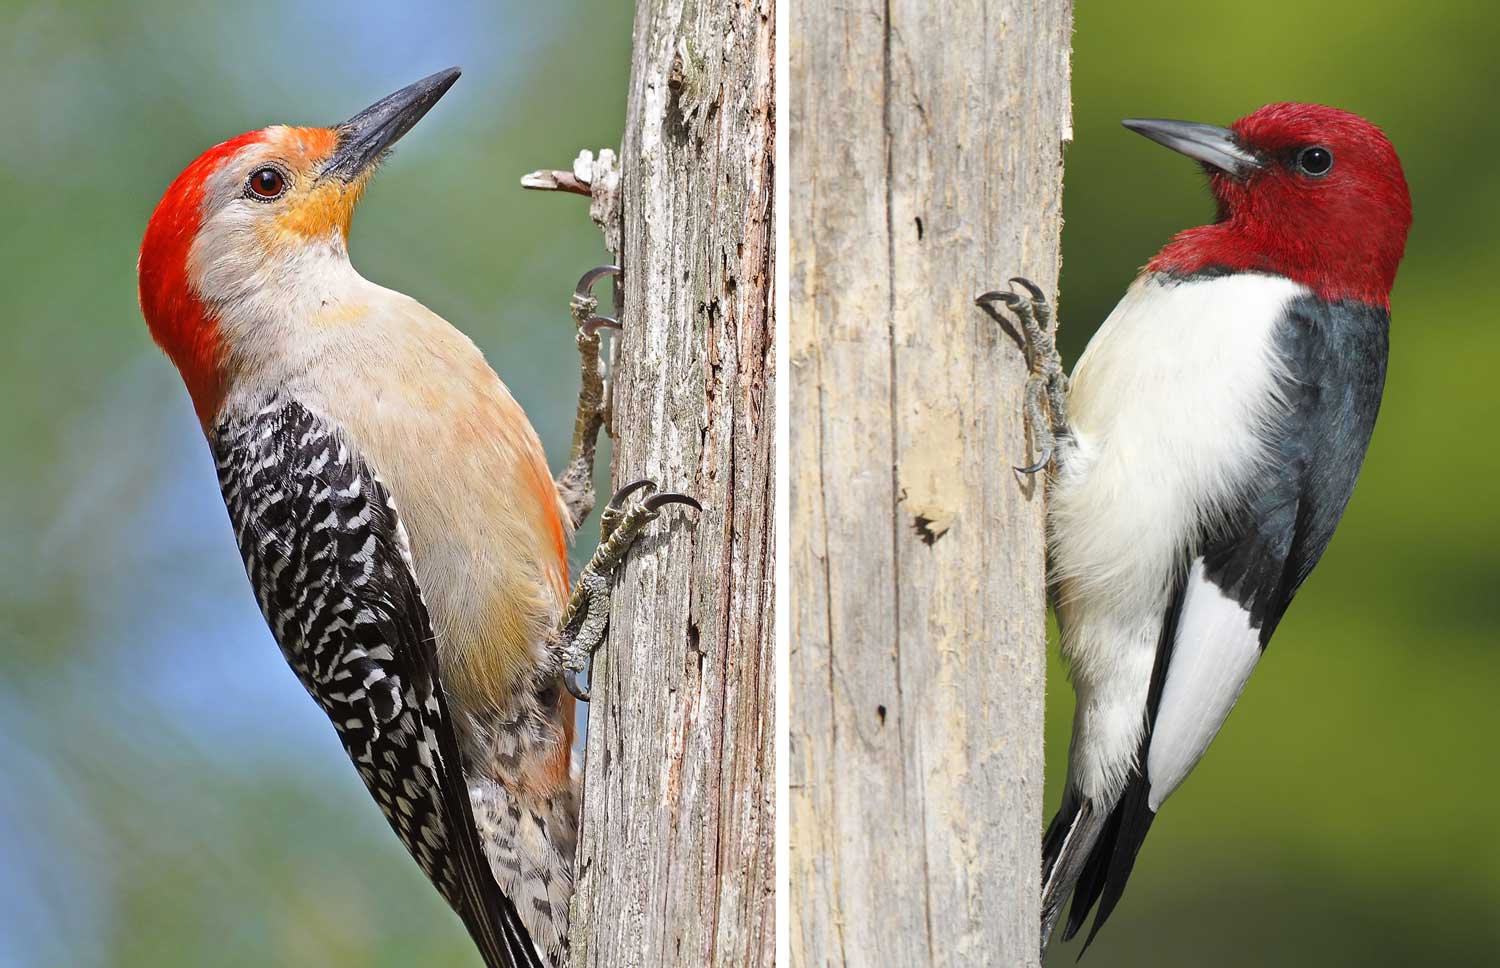 A red-bellied woodpecker and a red-headed woodpecker side by side.